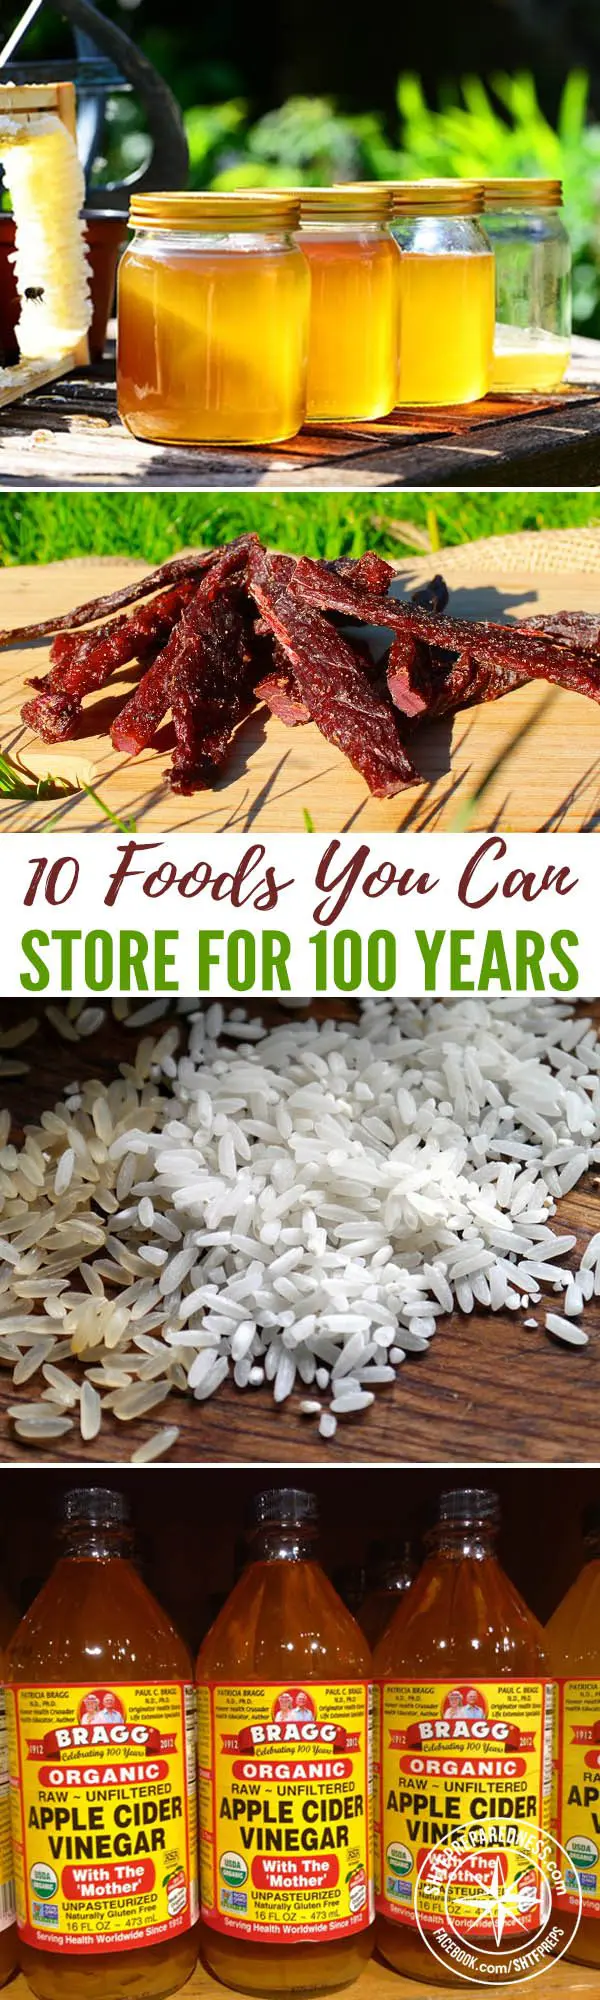 1.1.17 10 Foods You Can Store For 100 Years